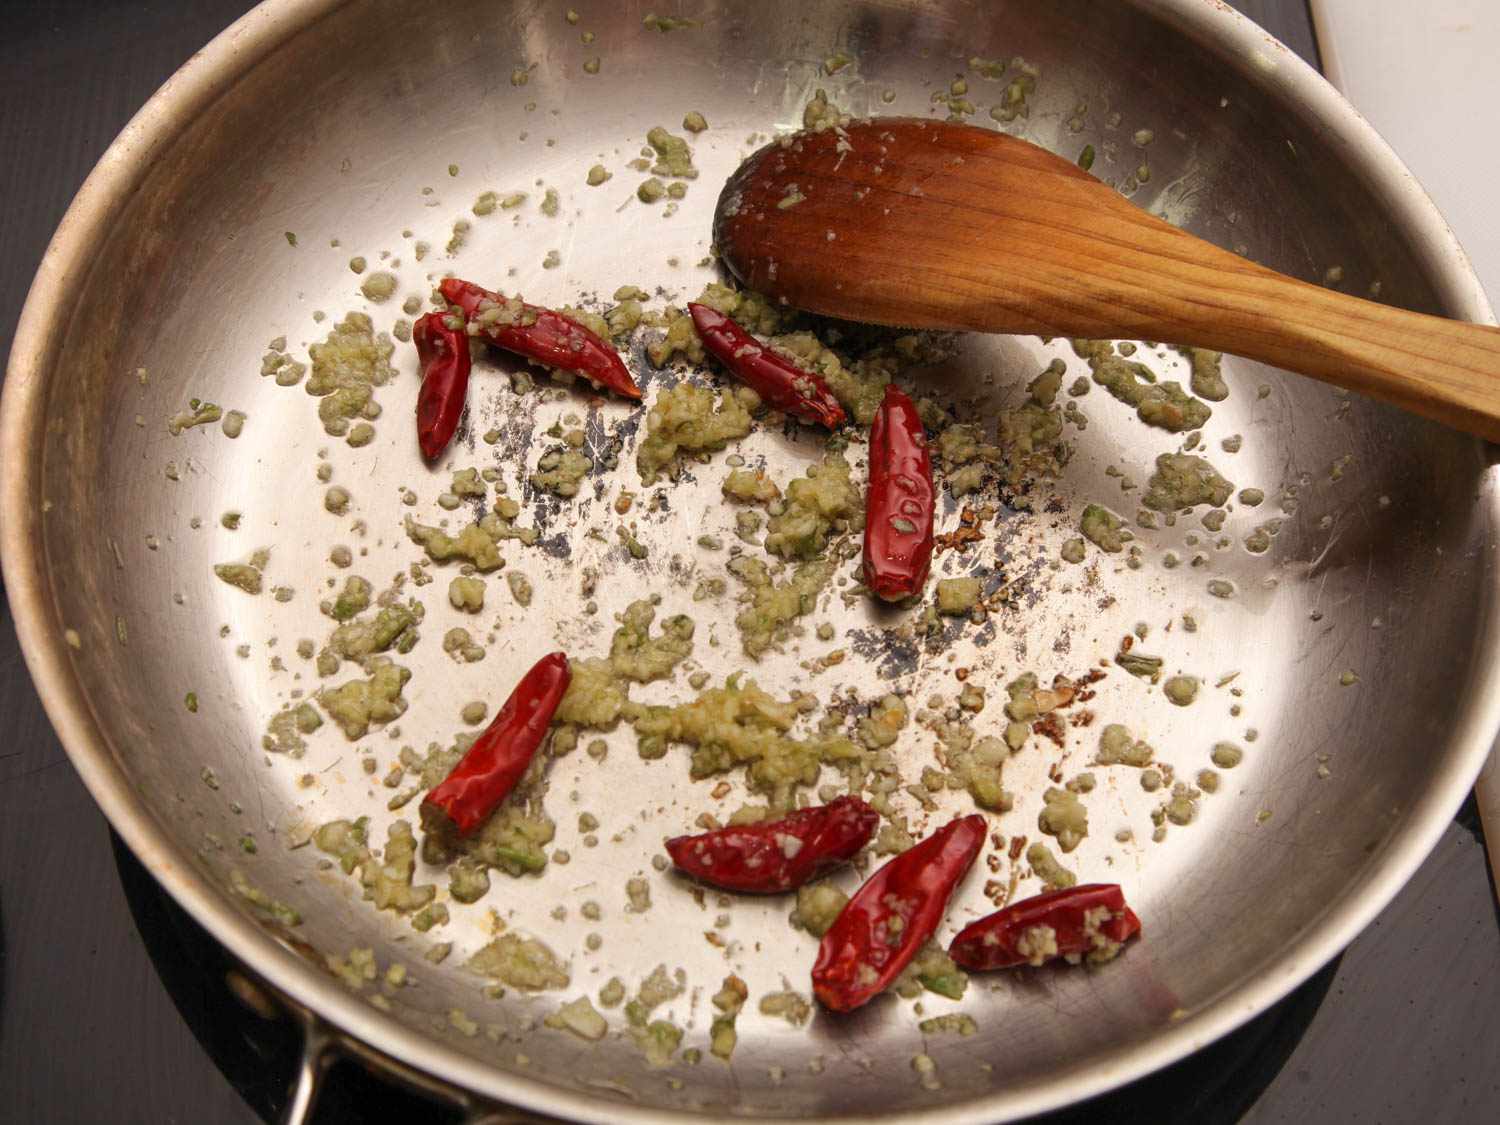 Sauteing garlic and chiles in a stainless steel skillet for General Tso's chicken.